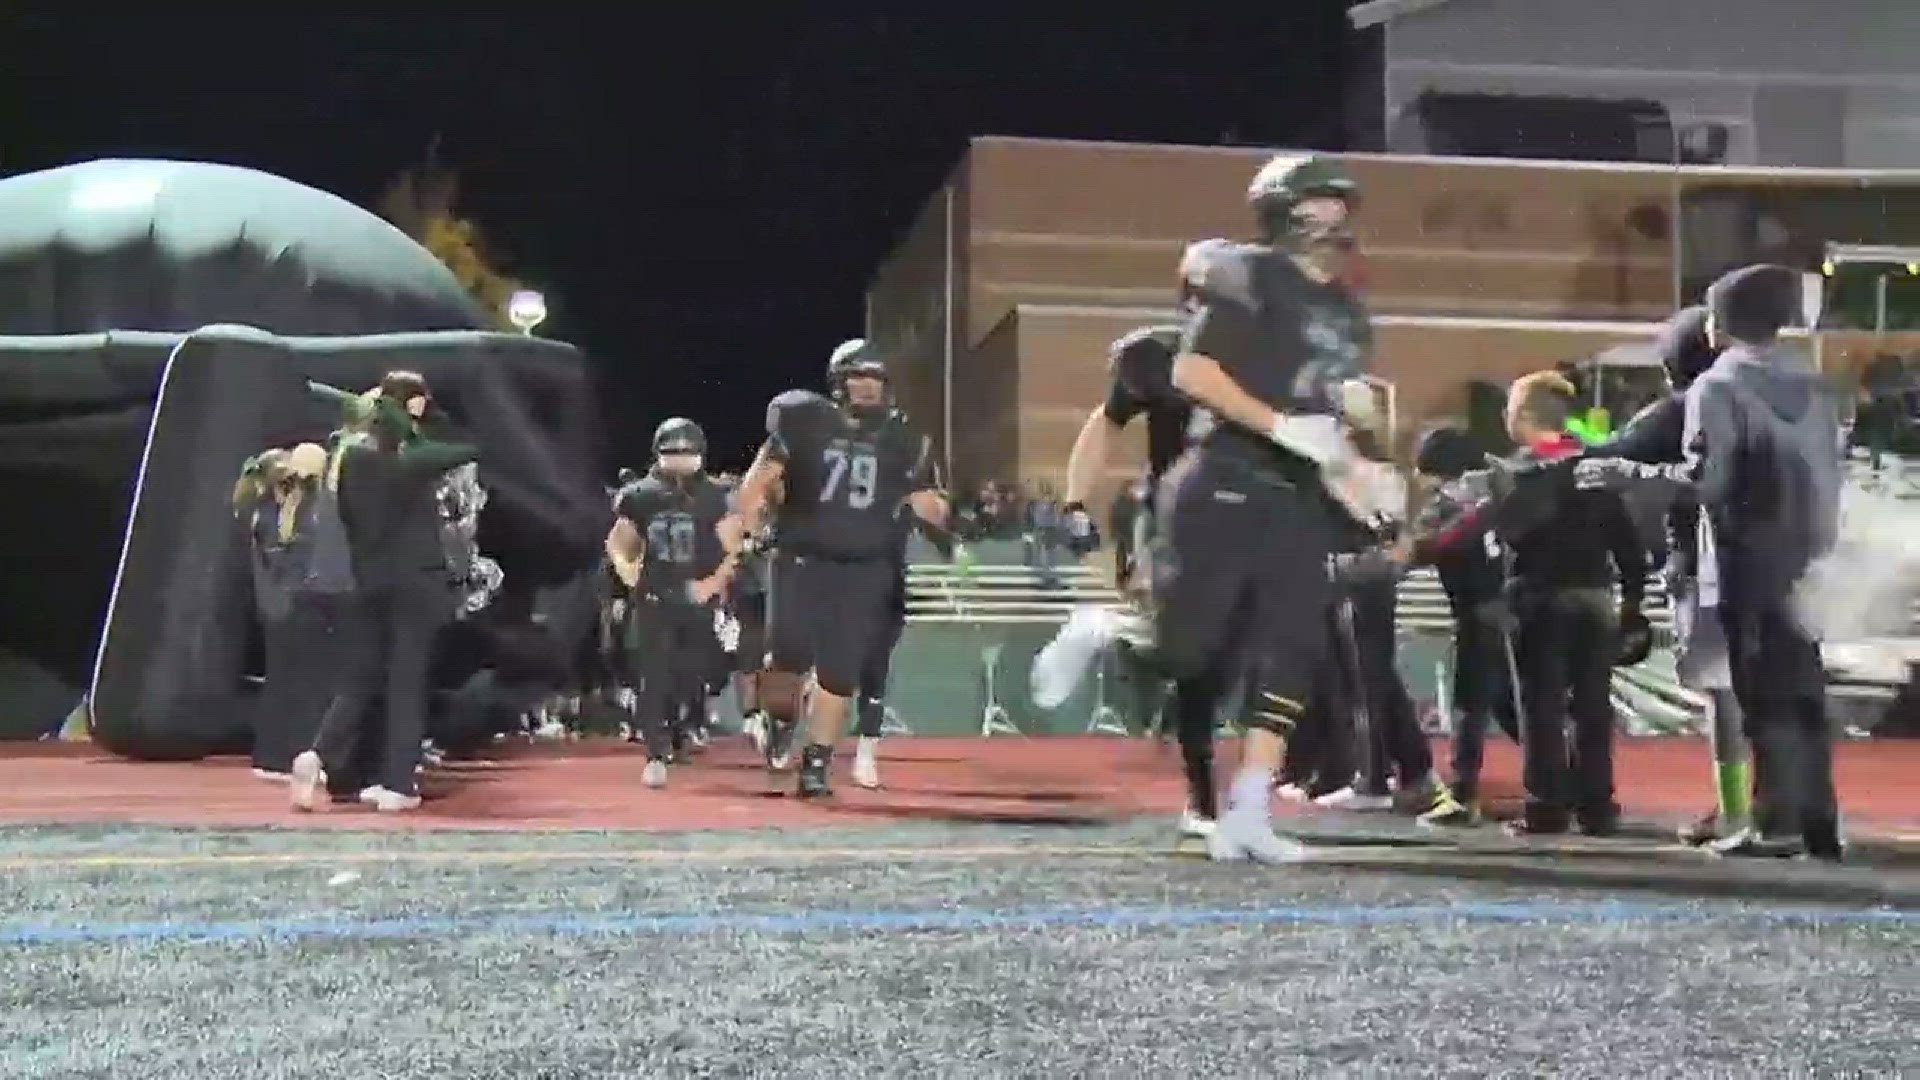 Highlights of No. 4 West Salem's 33-24 win over No. 13 Grant in the second round of the playoffs on Nov. 10, 2017.